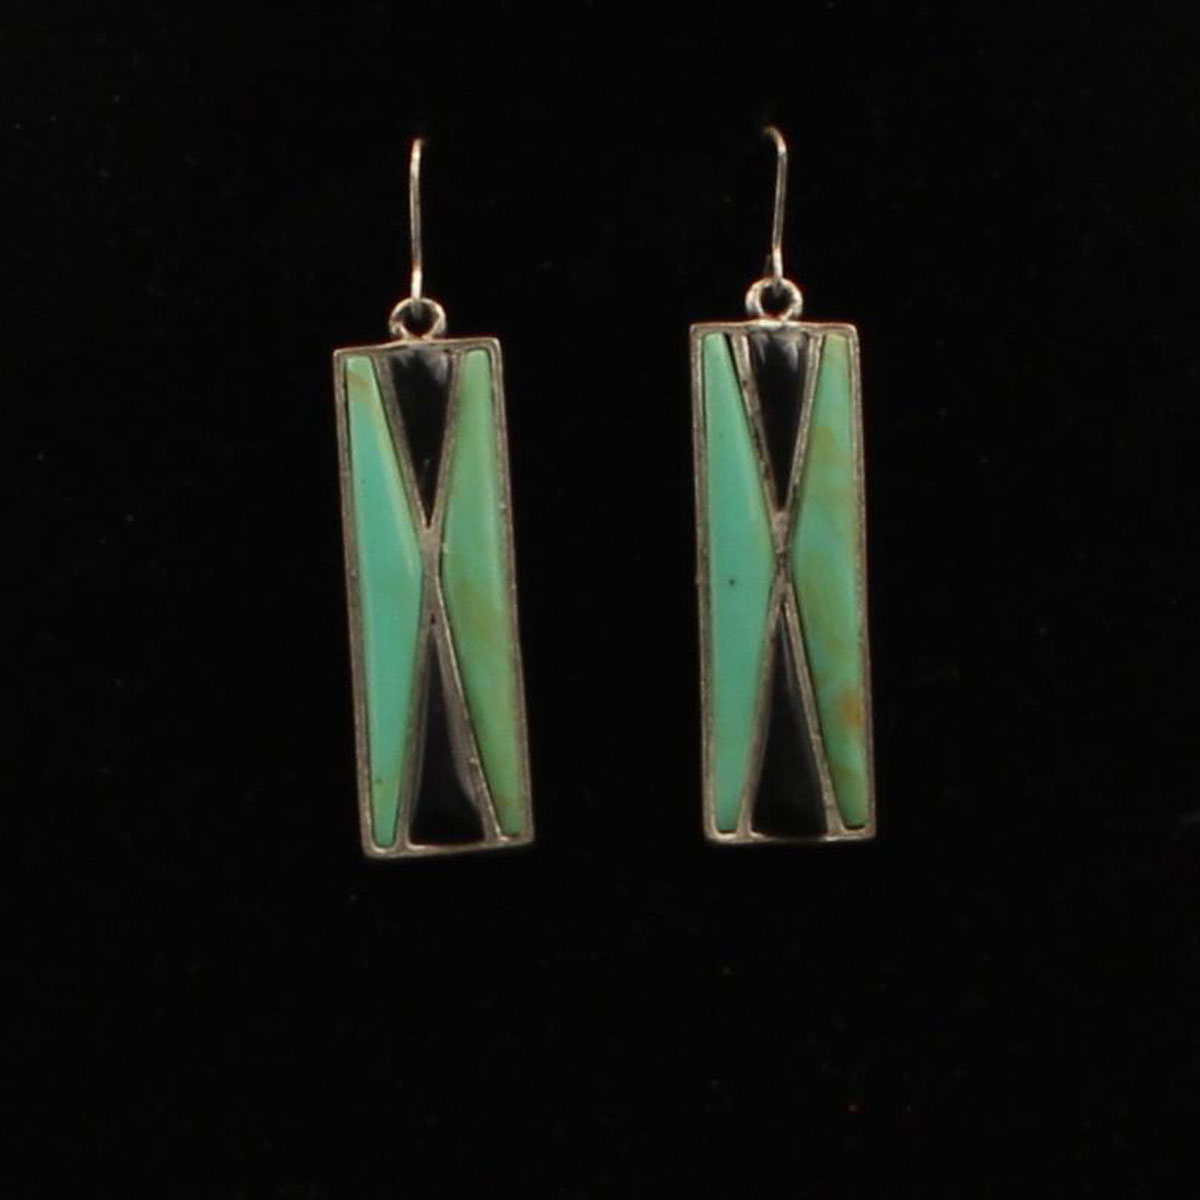 Dbue2104 Antique Silver & Turquoise Black Inlay Earrings